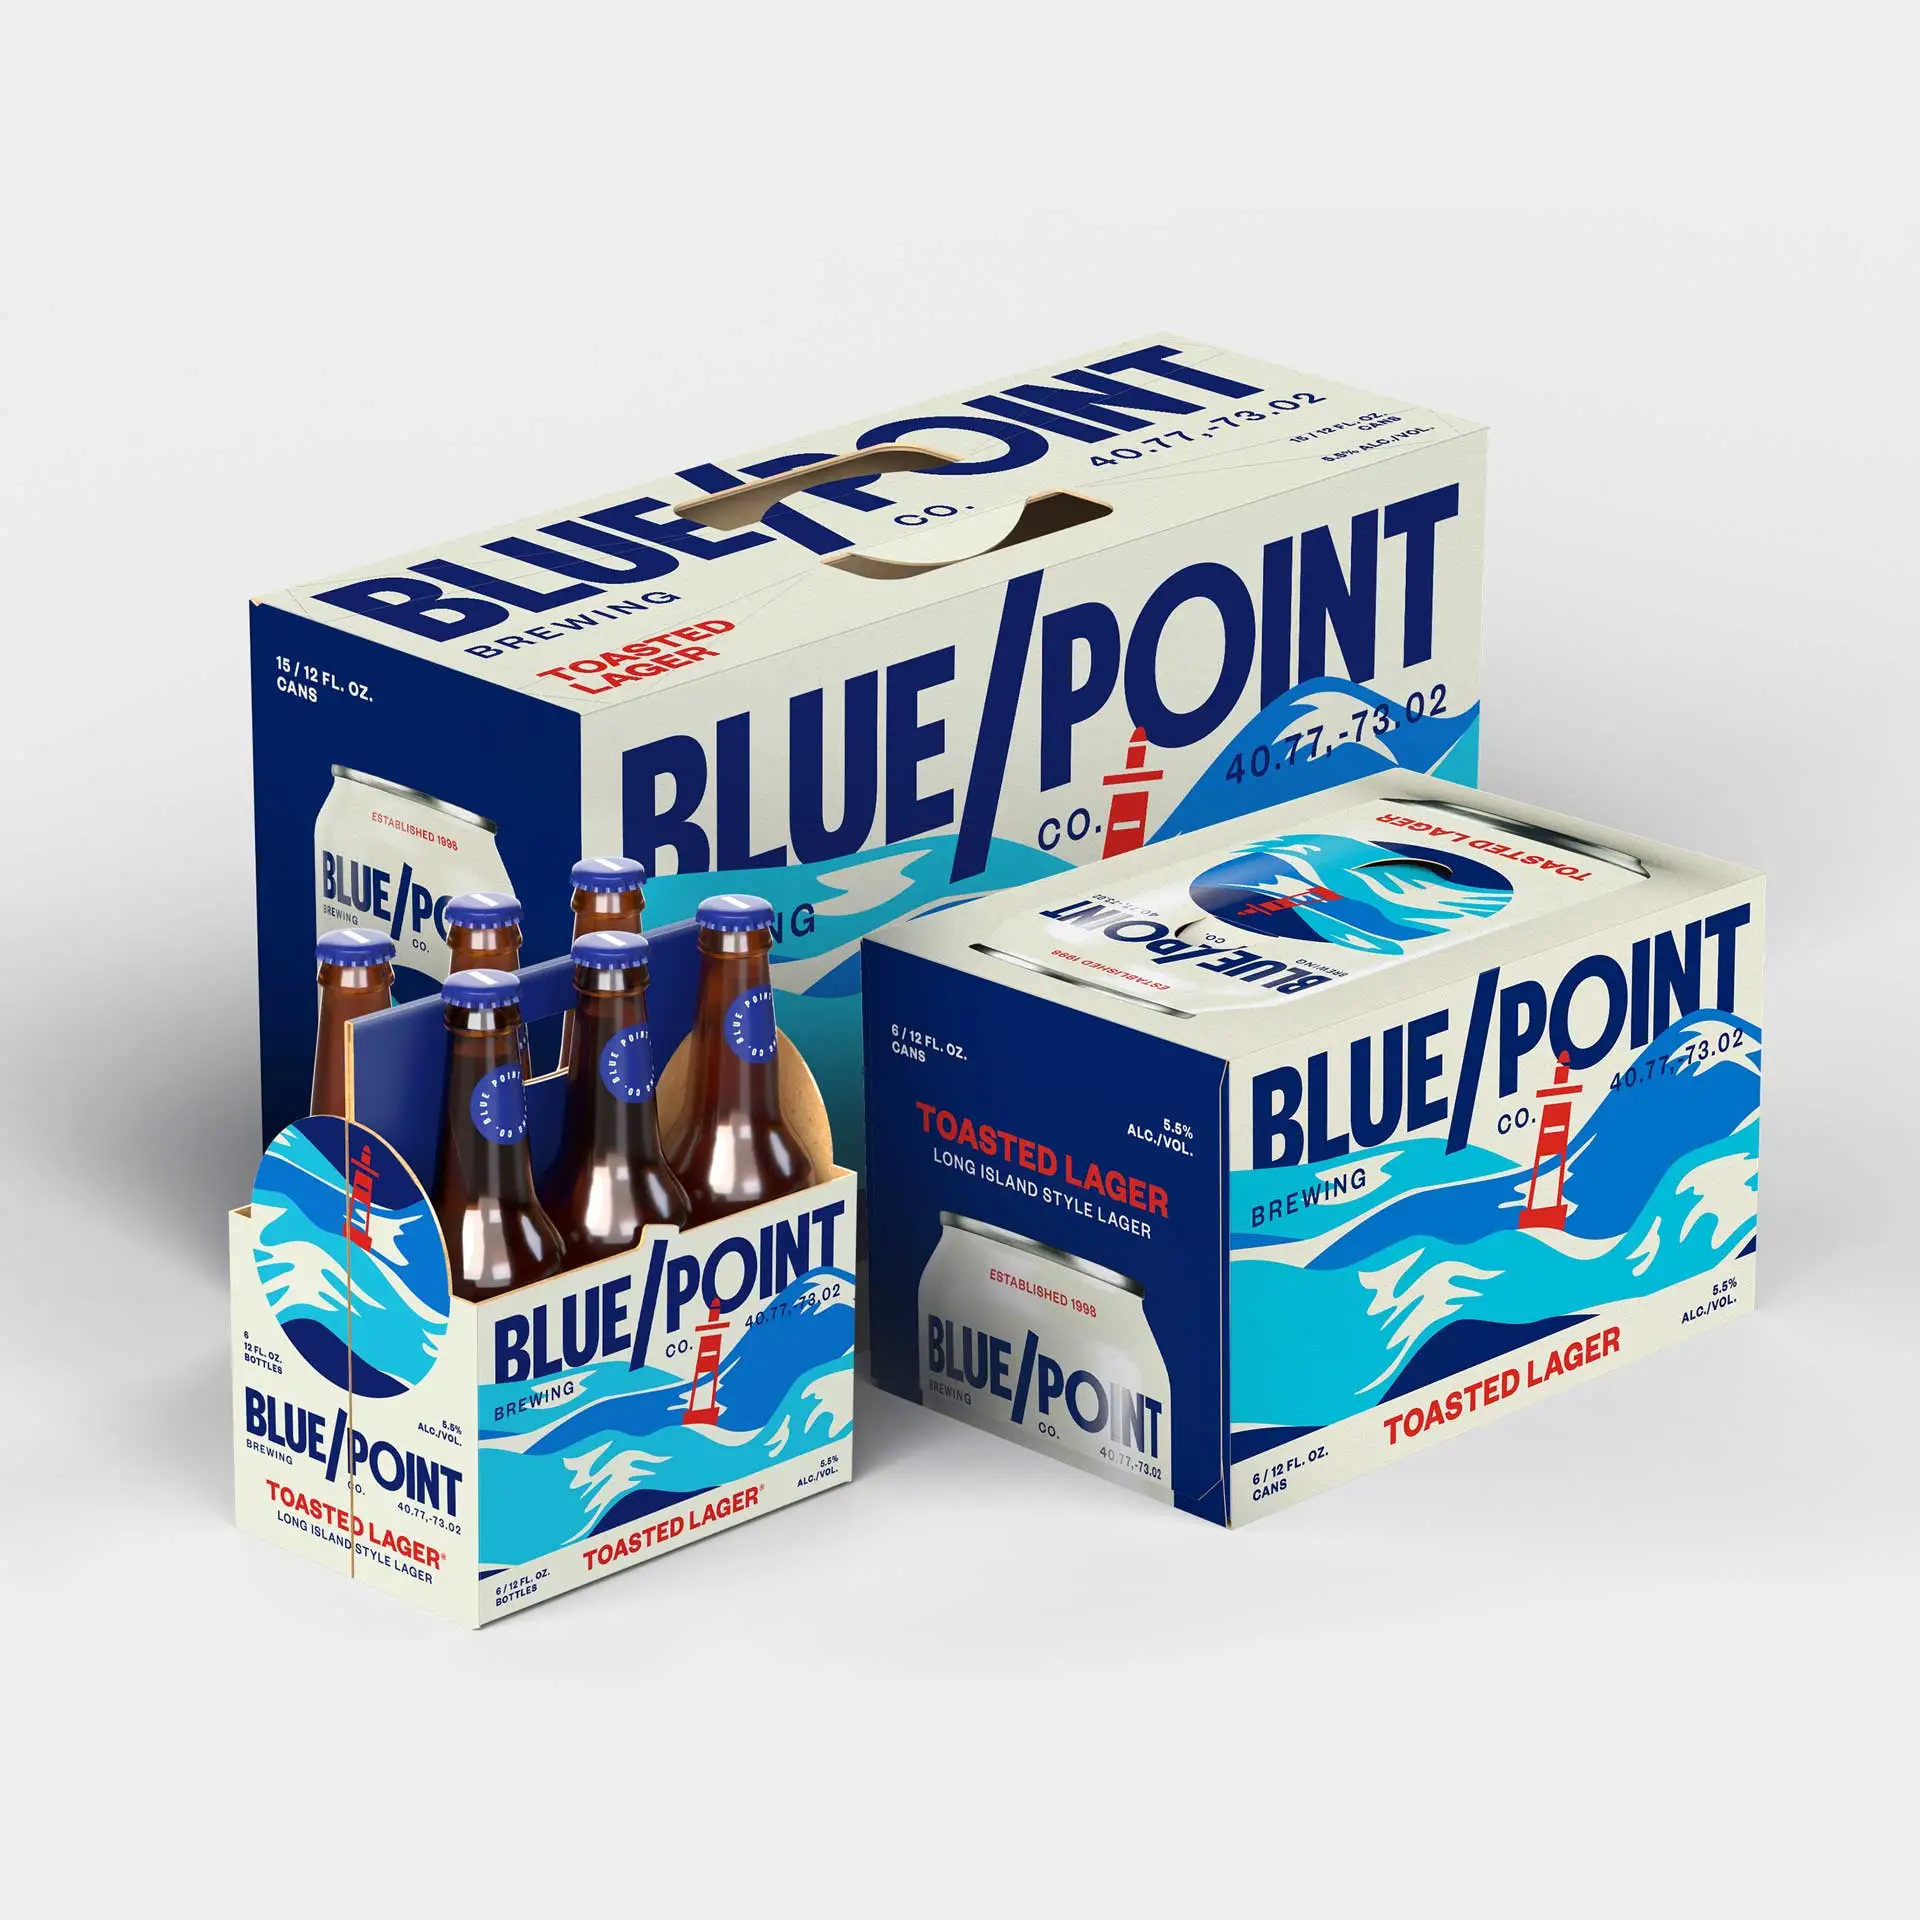 Blue Point's Toasted Lager Packaging System